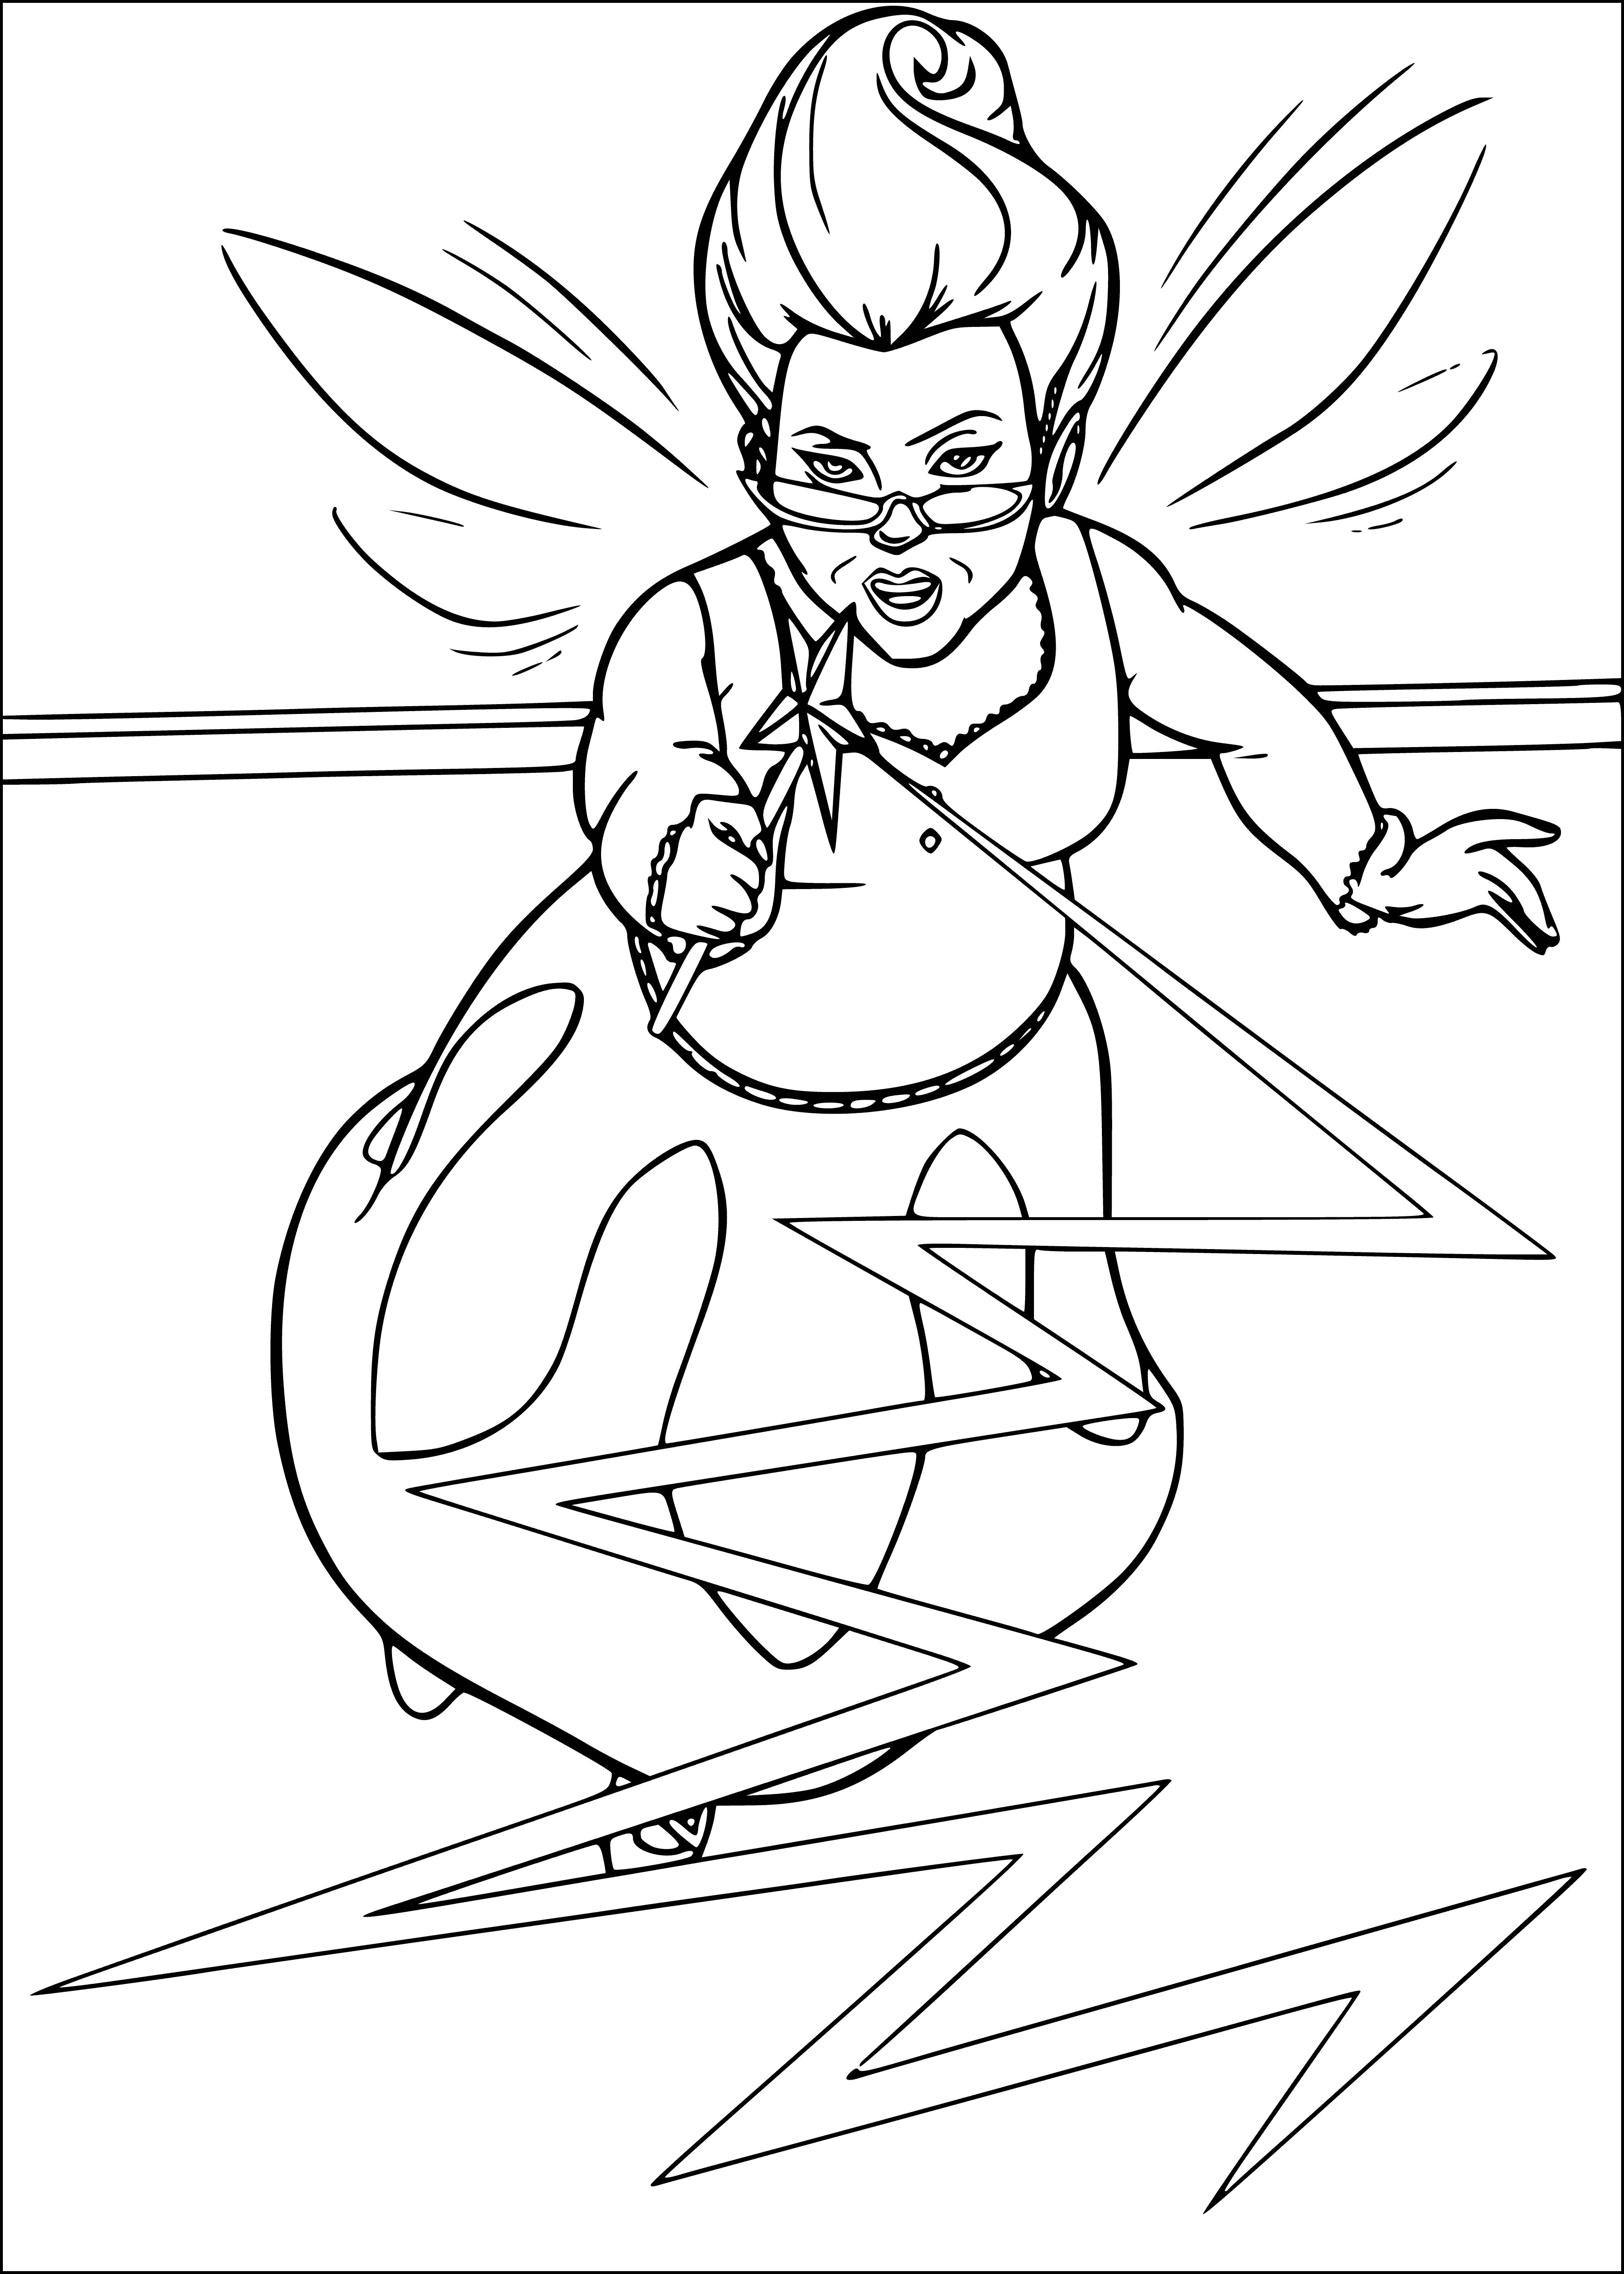 The last spell coloring page